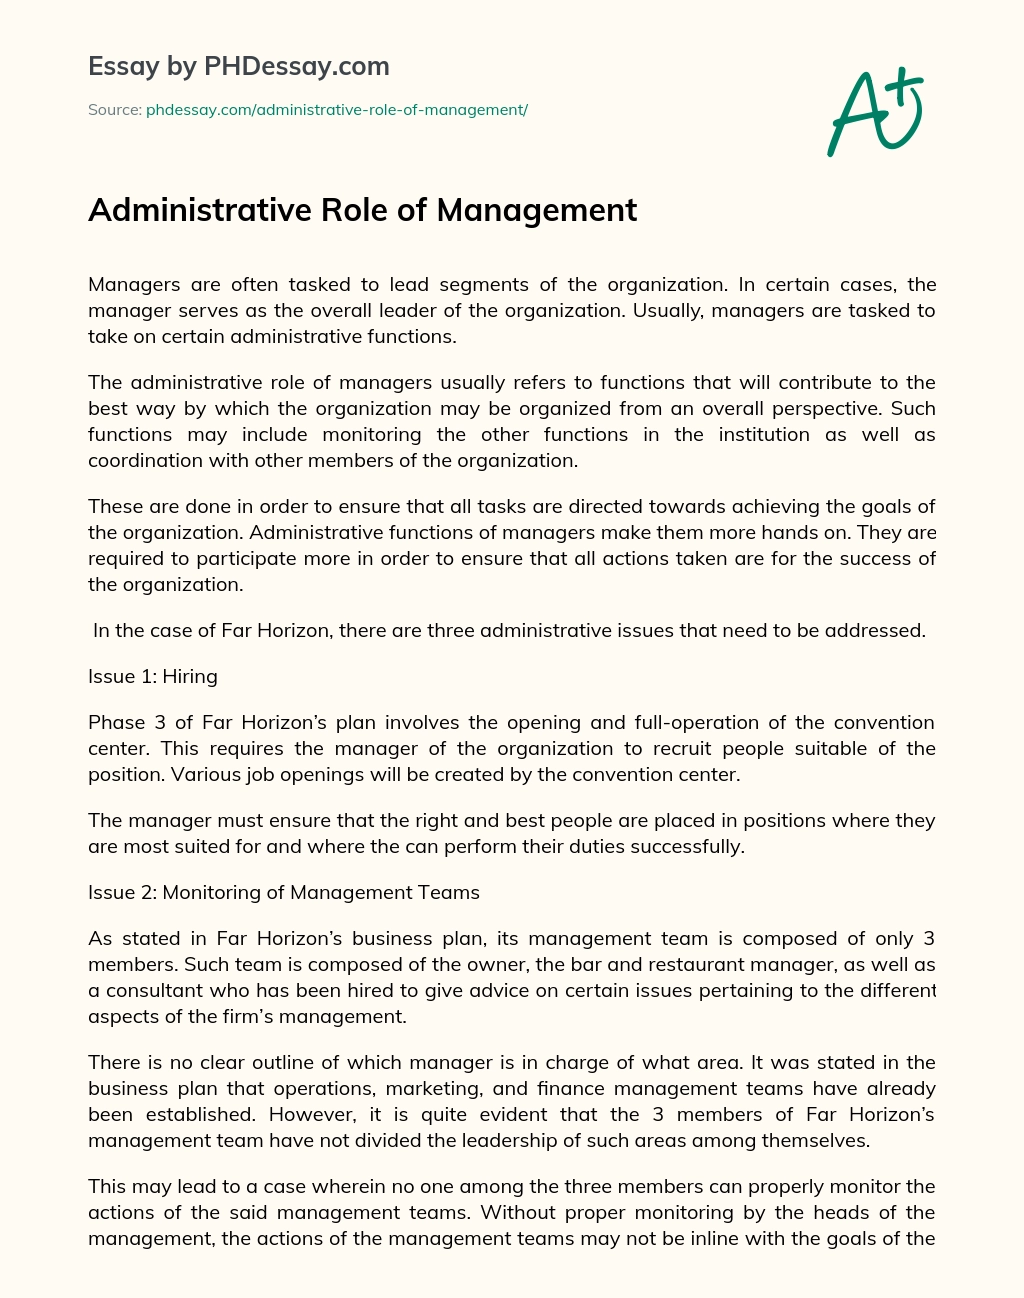 Administrative Role of Management essay